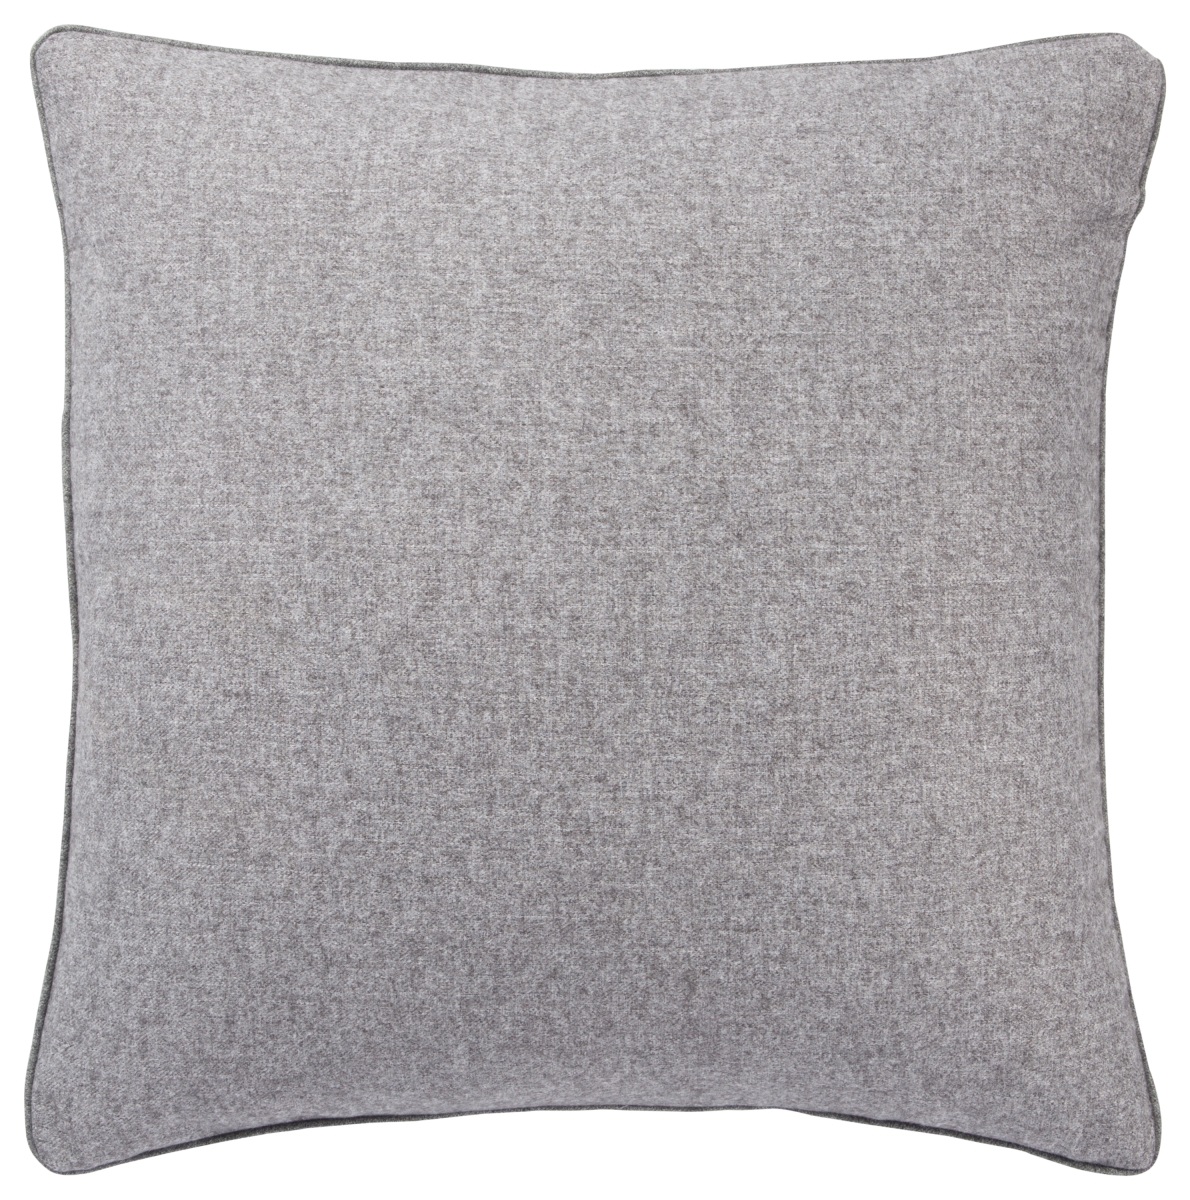 Plw103291 22 X 22 In. Pilcro Rollins Solid Light Gray Poly Throw Pillow